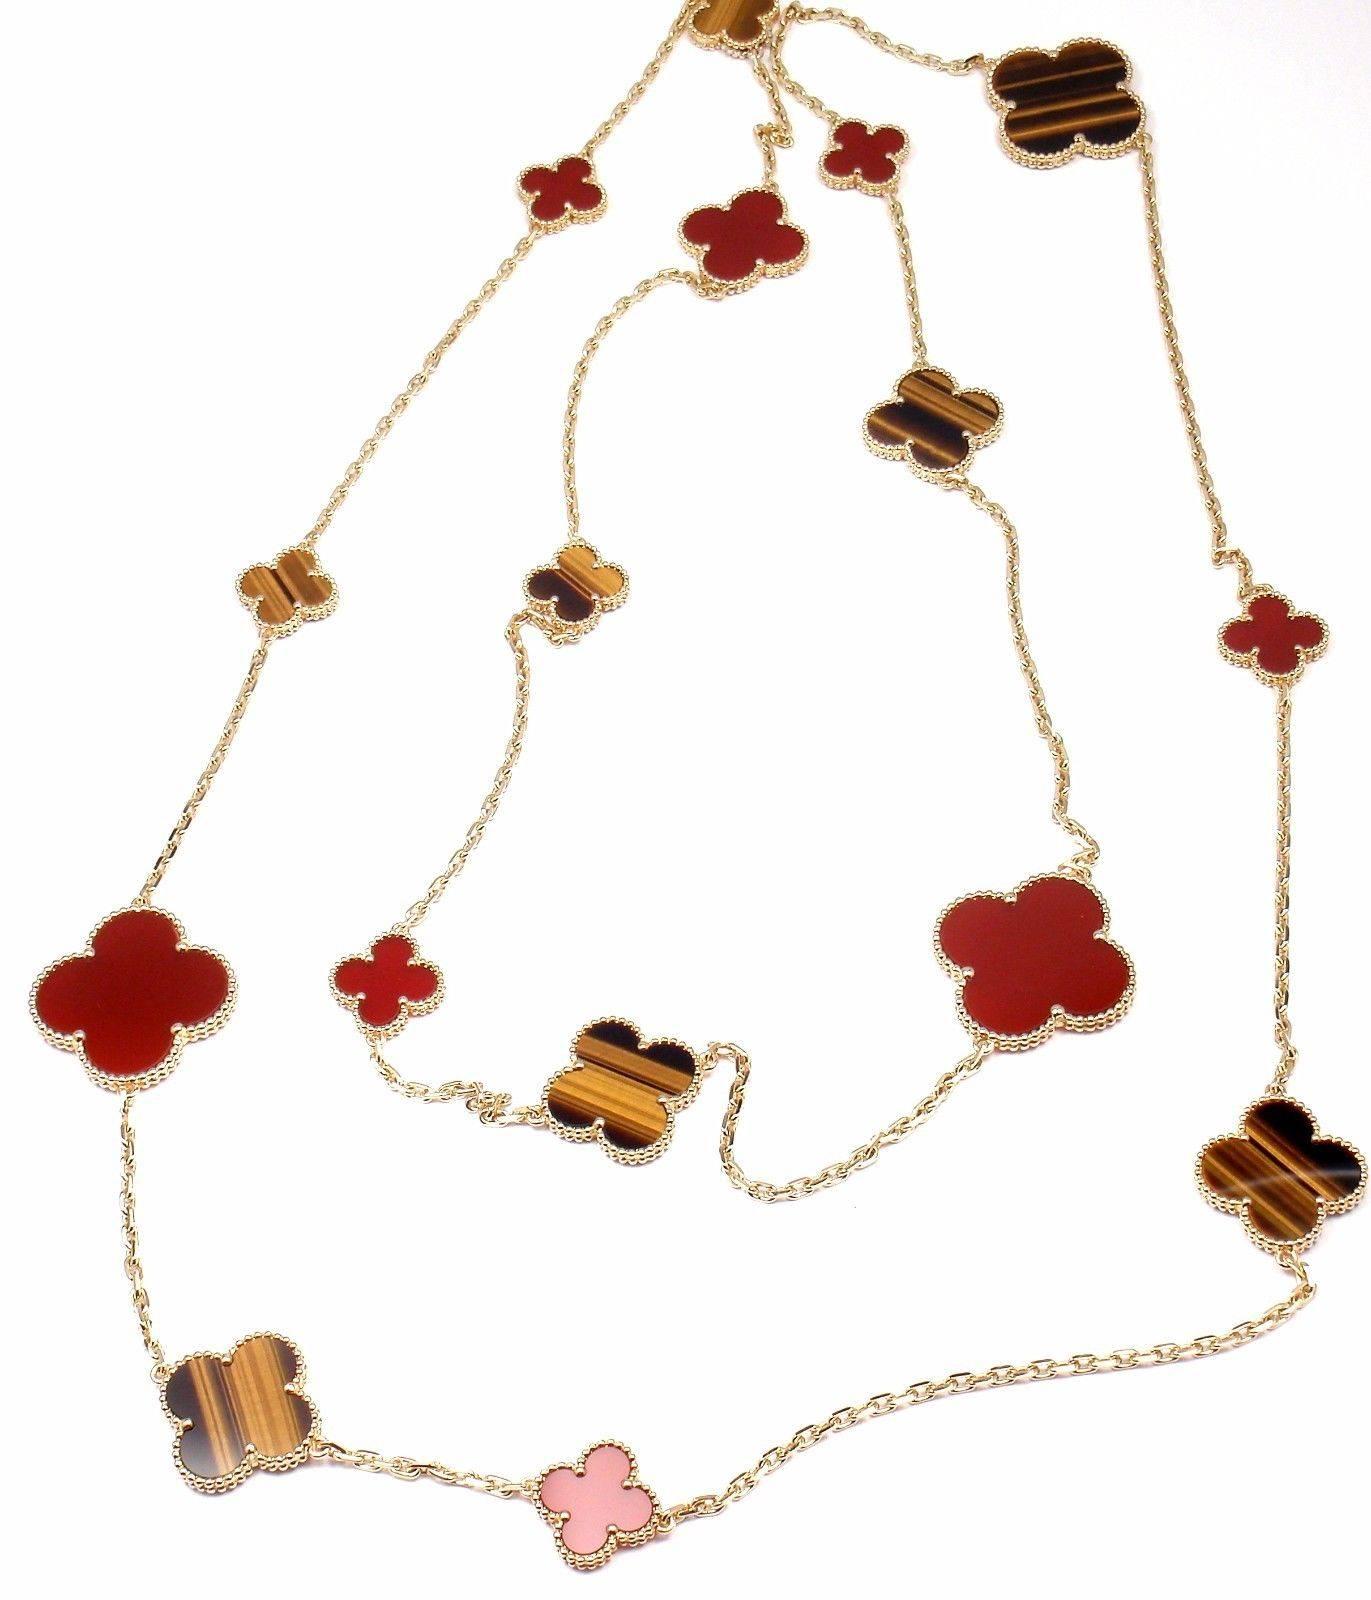 18k Yellow Gold Magic Alhambra sixteen motif necklace with carnelian and tiger's eye, by Van Cleef Arpels. 50